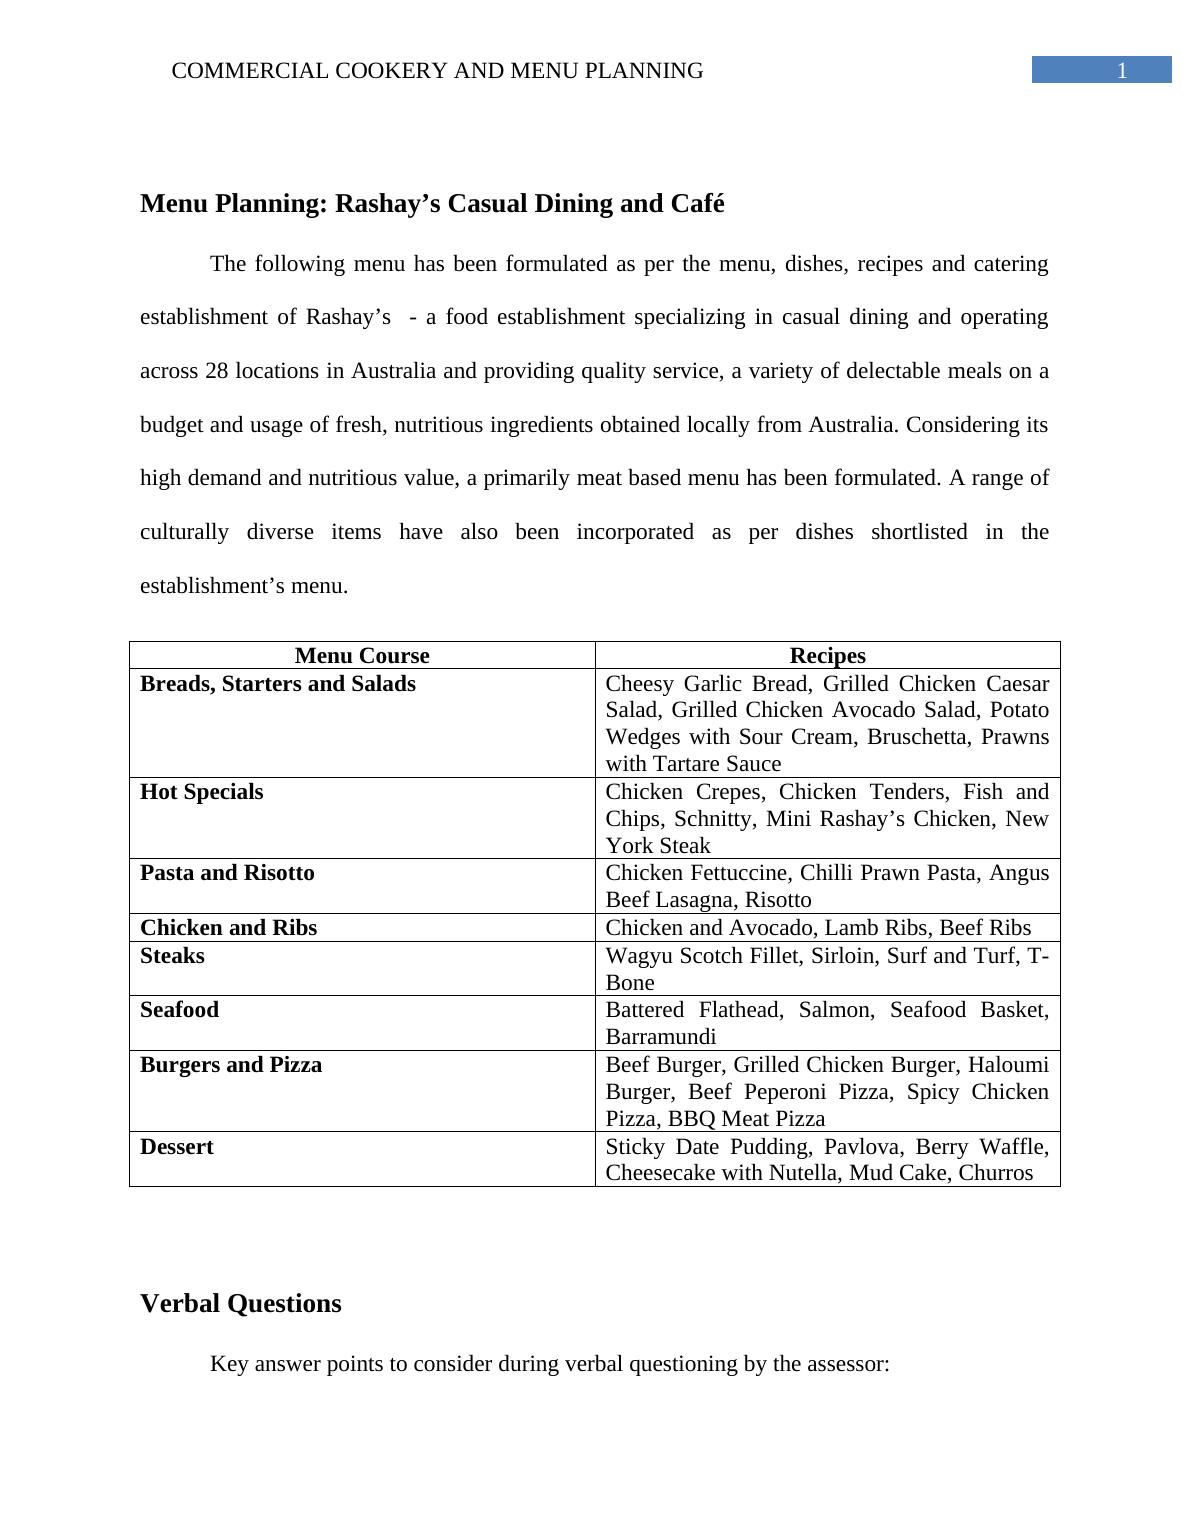 Commercial Cookery and Menu Planning_2